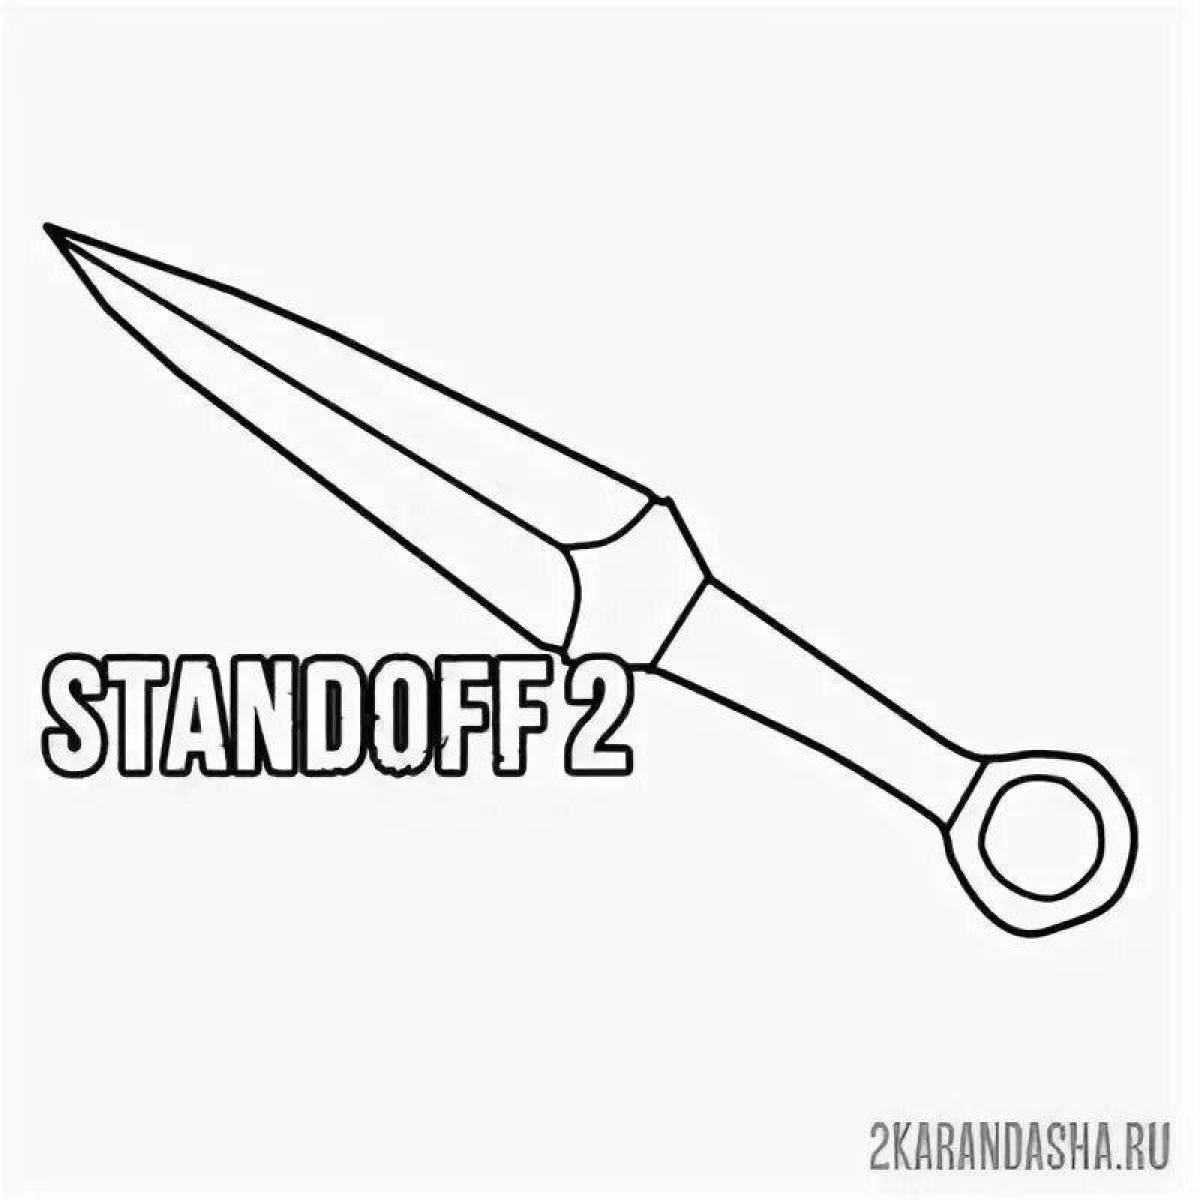 Radiant coloring page kunai knife from standoff 2